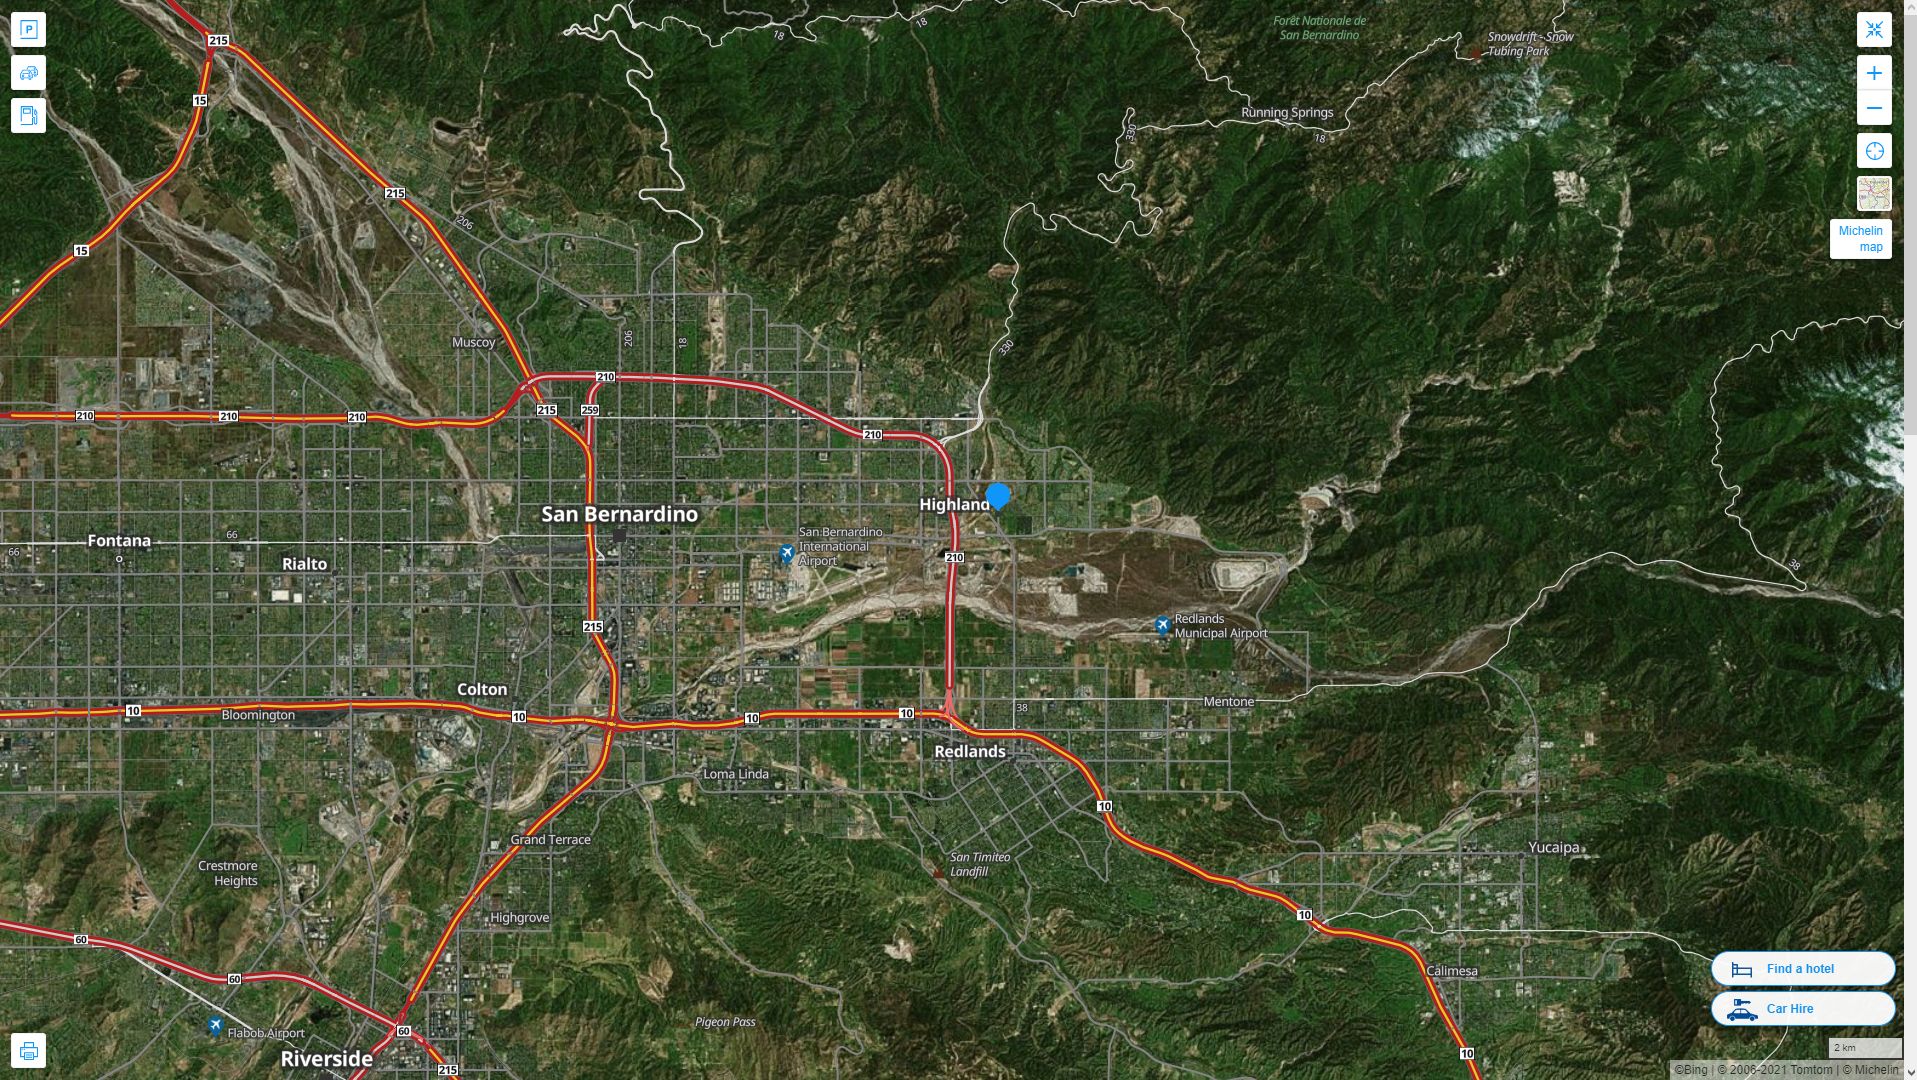 Highland California Highway and Road Map with Satellite View